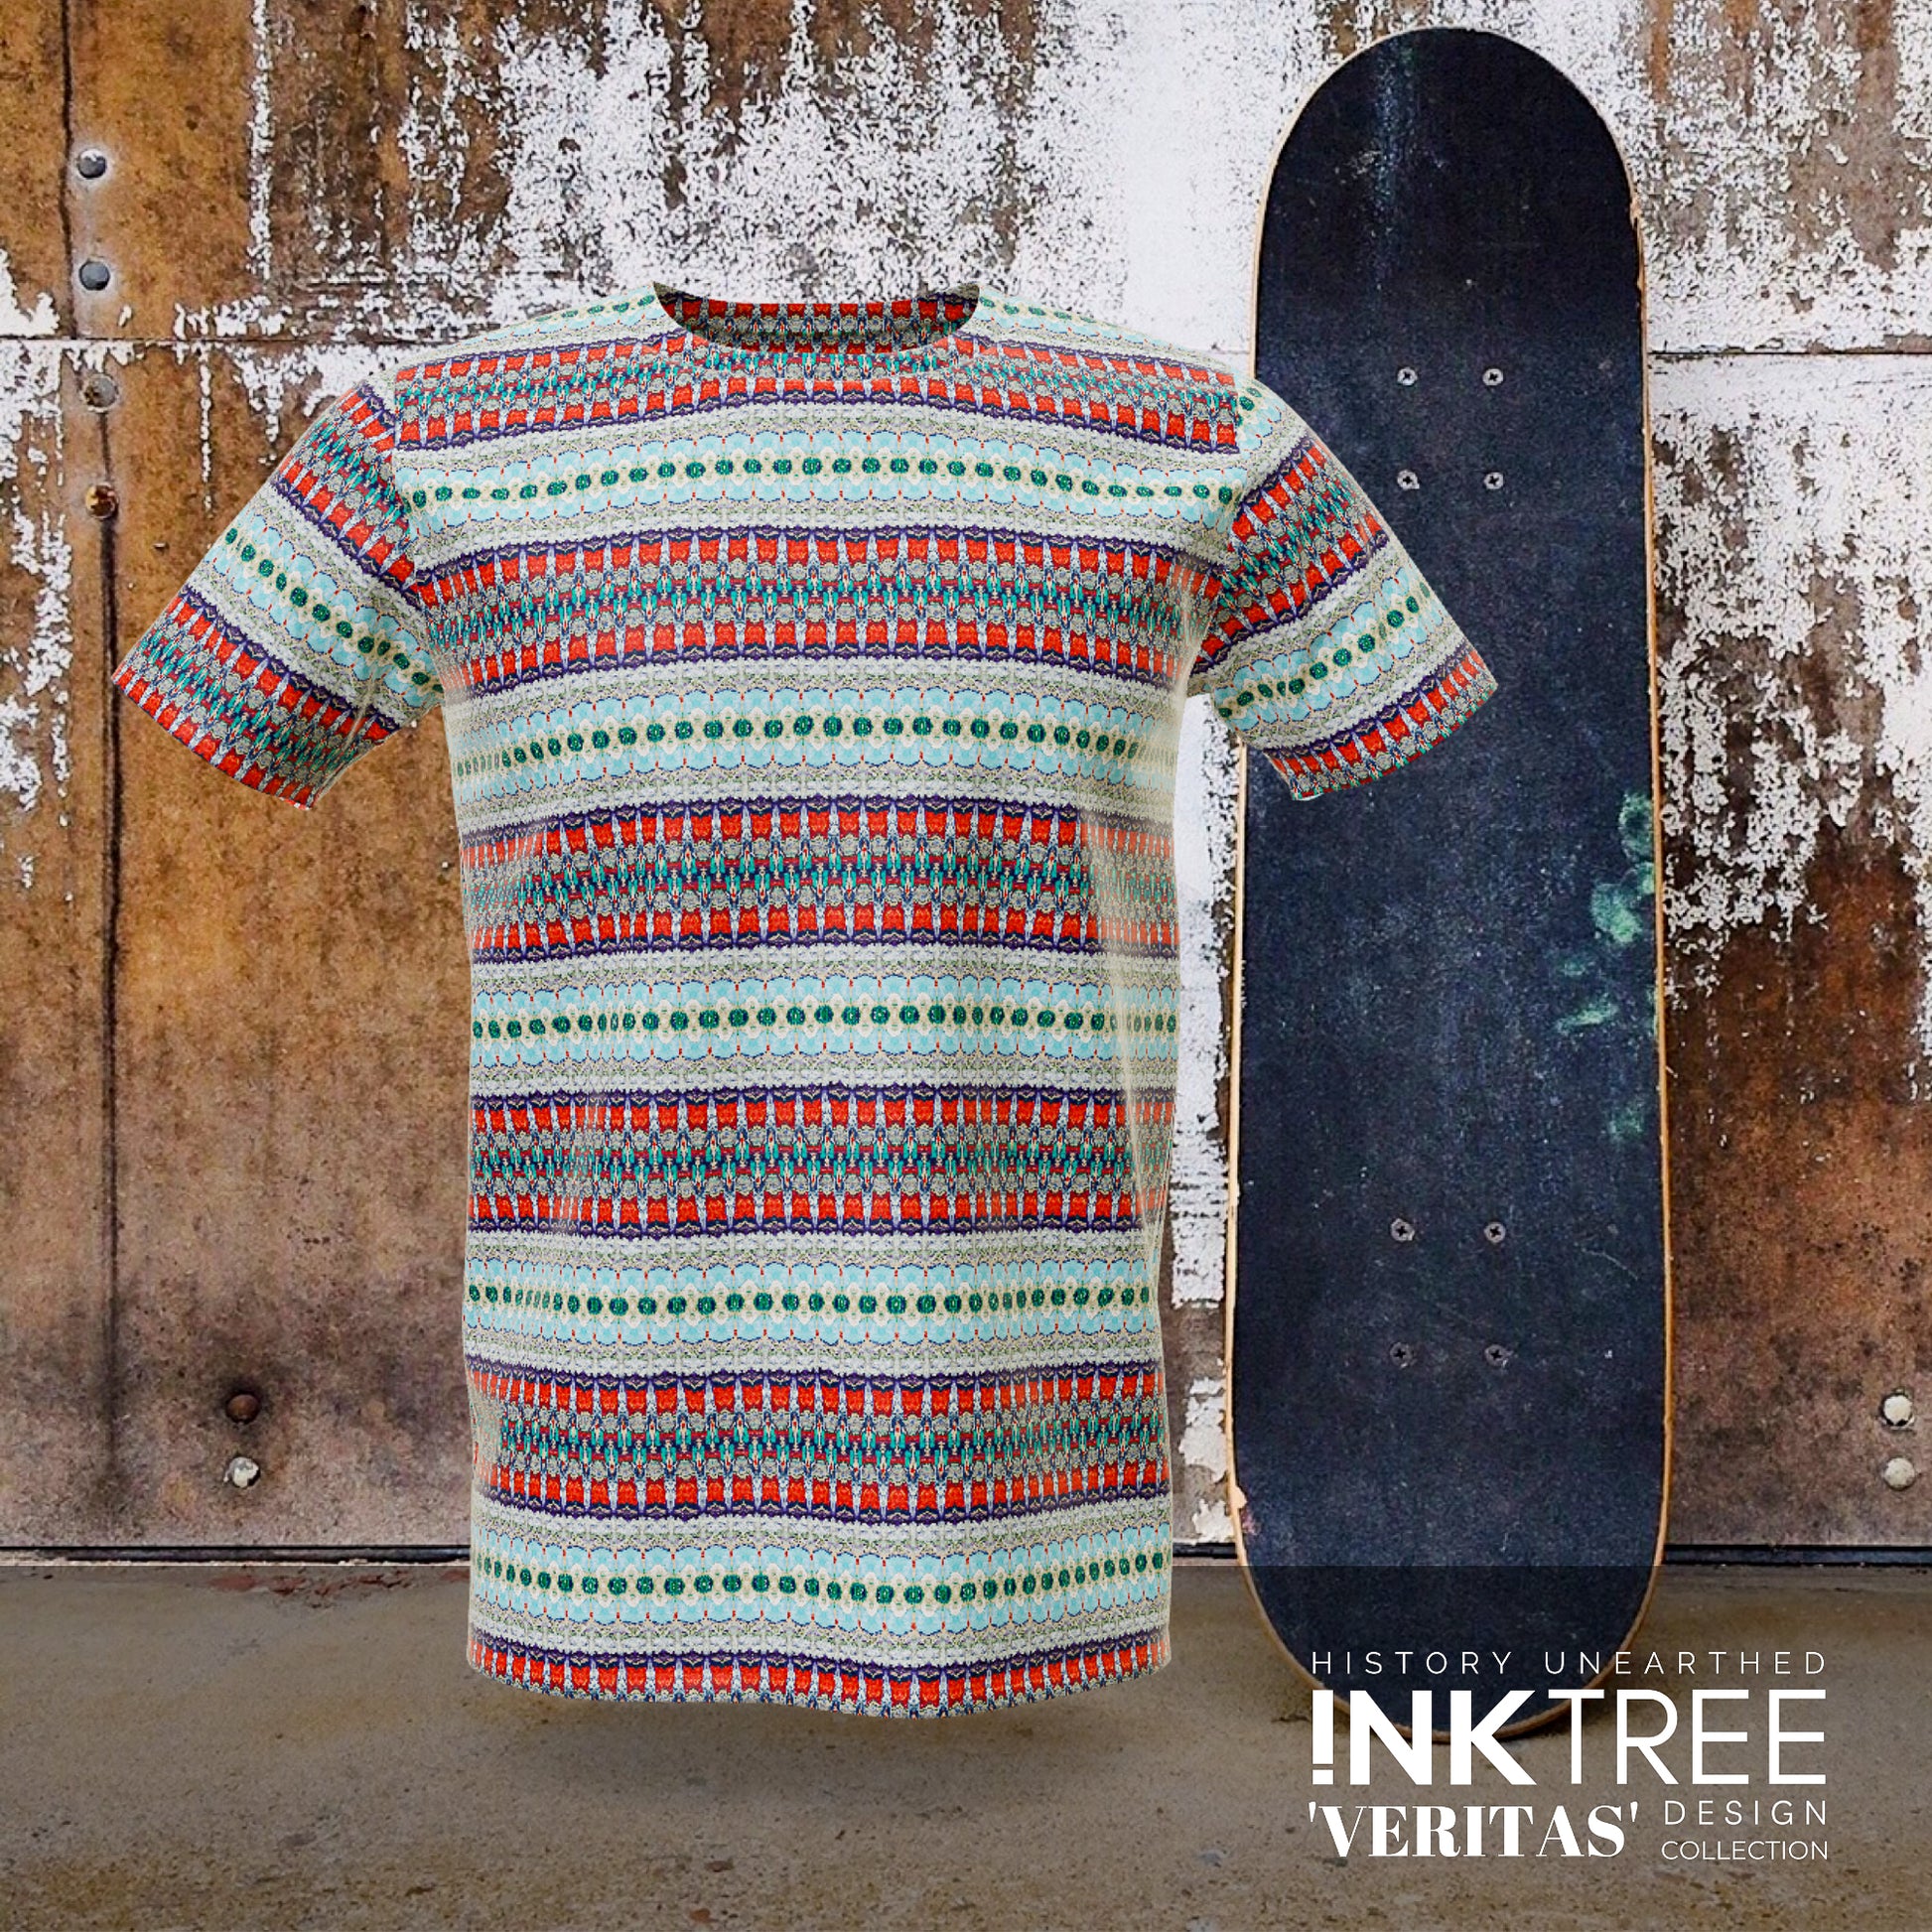 A blue, red and green horizontal line patterned t'shirt, with a skateboard and rusty wall background.